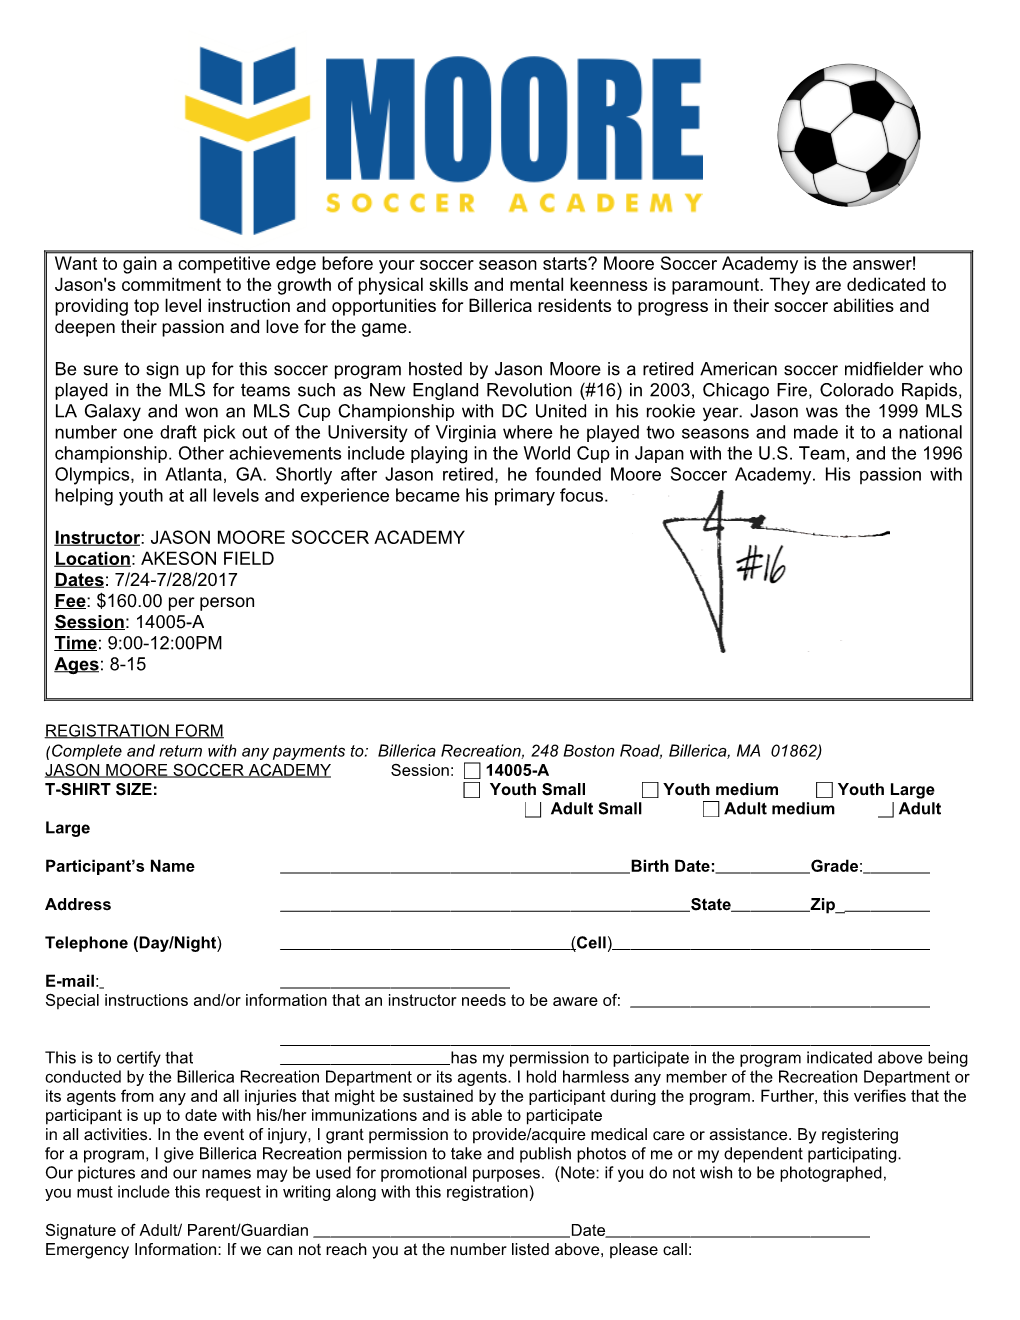 Moore Soccer Academy Is the Answer! Jason's Commitment to the Growth of Physical Skills and Mental Keenness Is Paramount